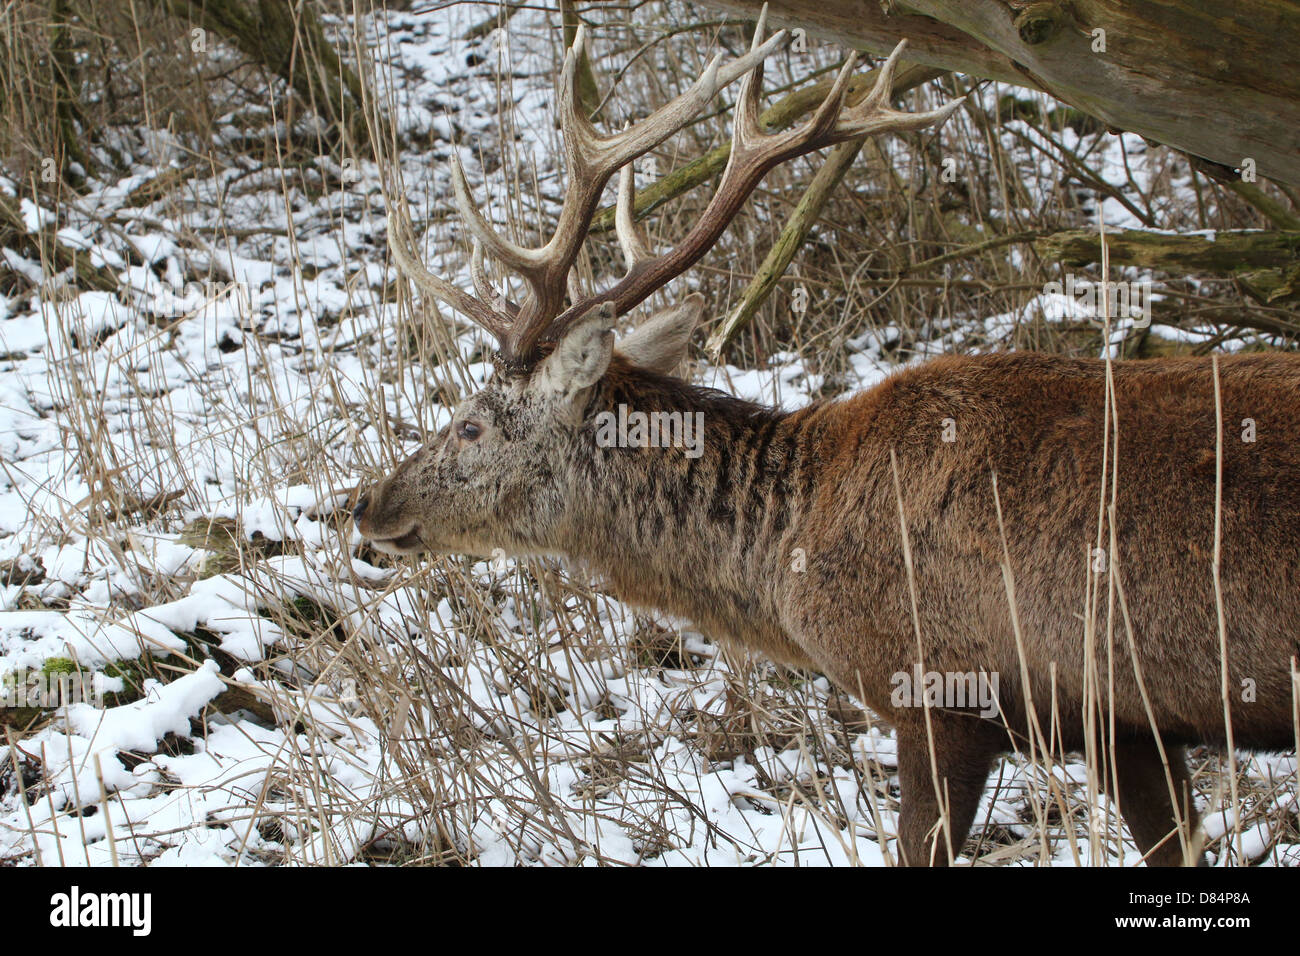 Close-up of a mature antlered  Red Deer stag (Cervus elaphus) walking trough a forest in a winter setting Stock Photo